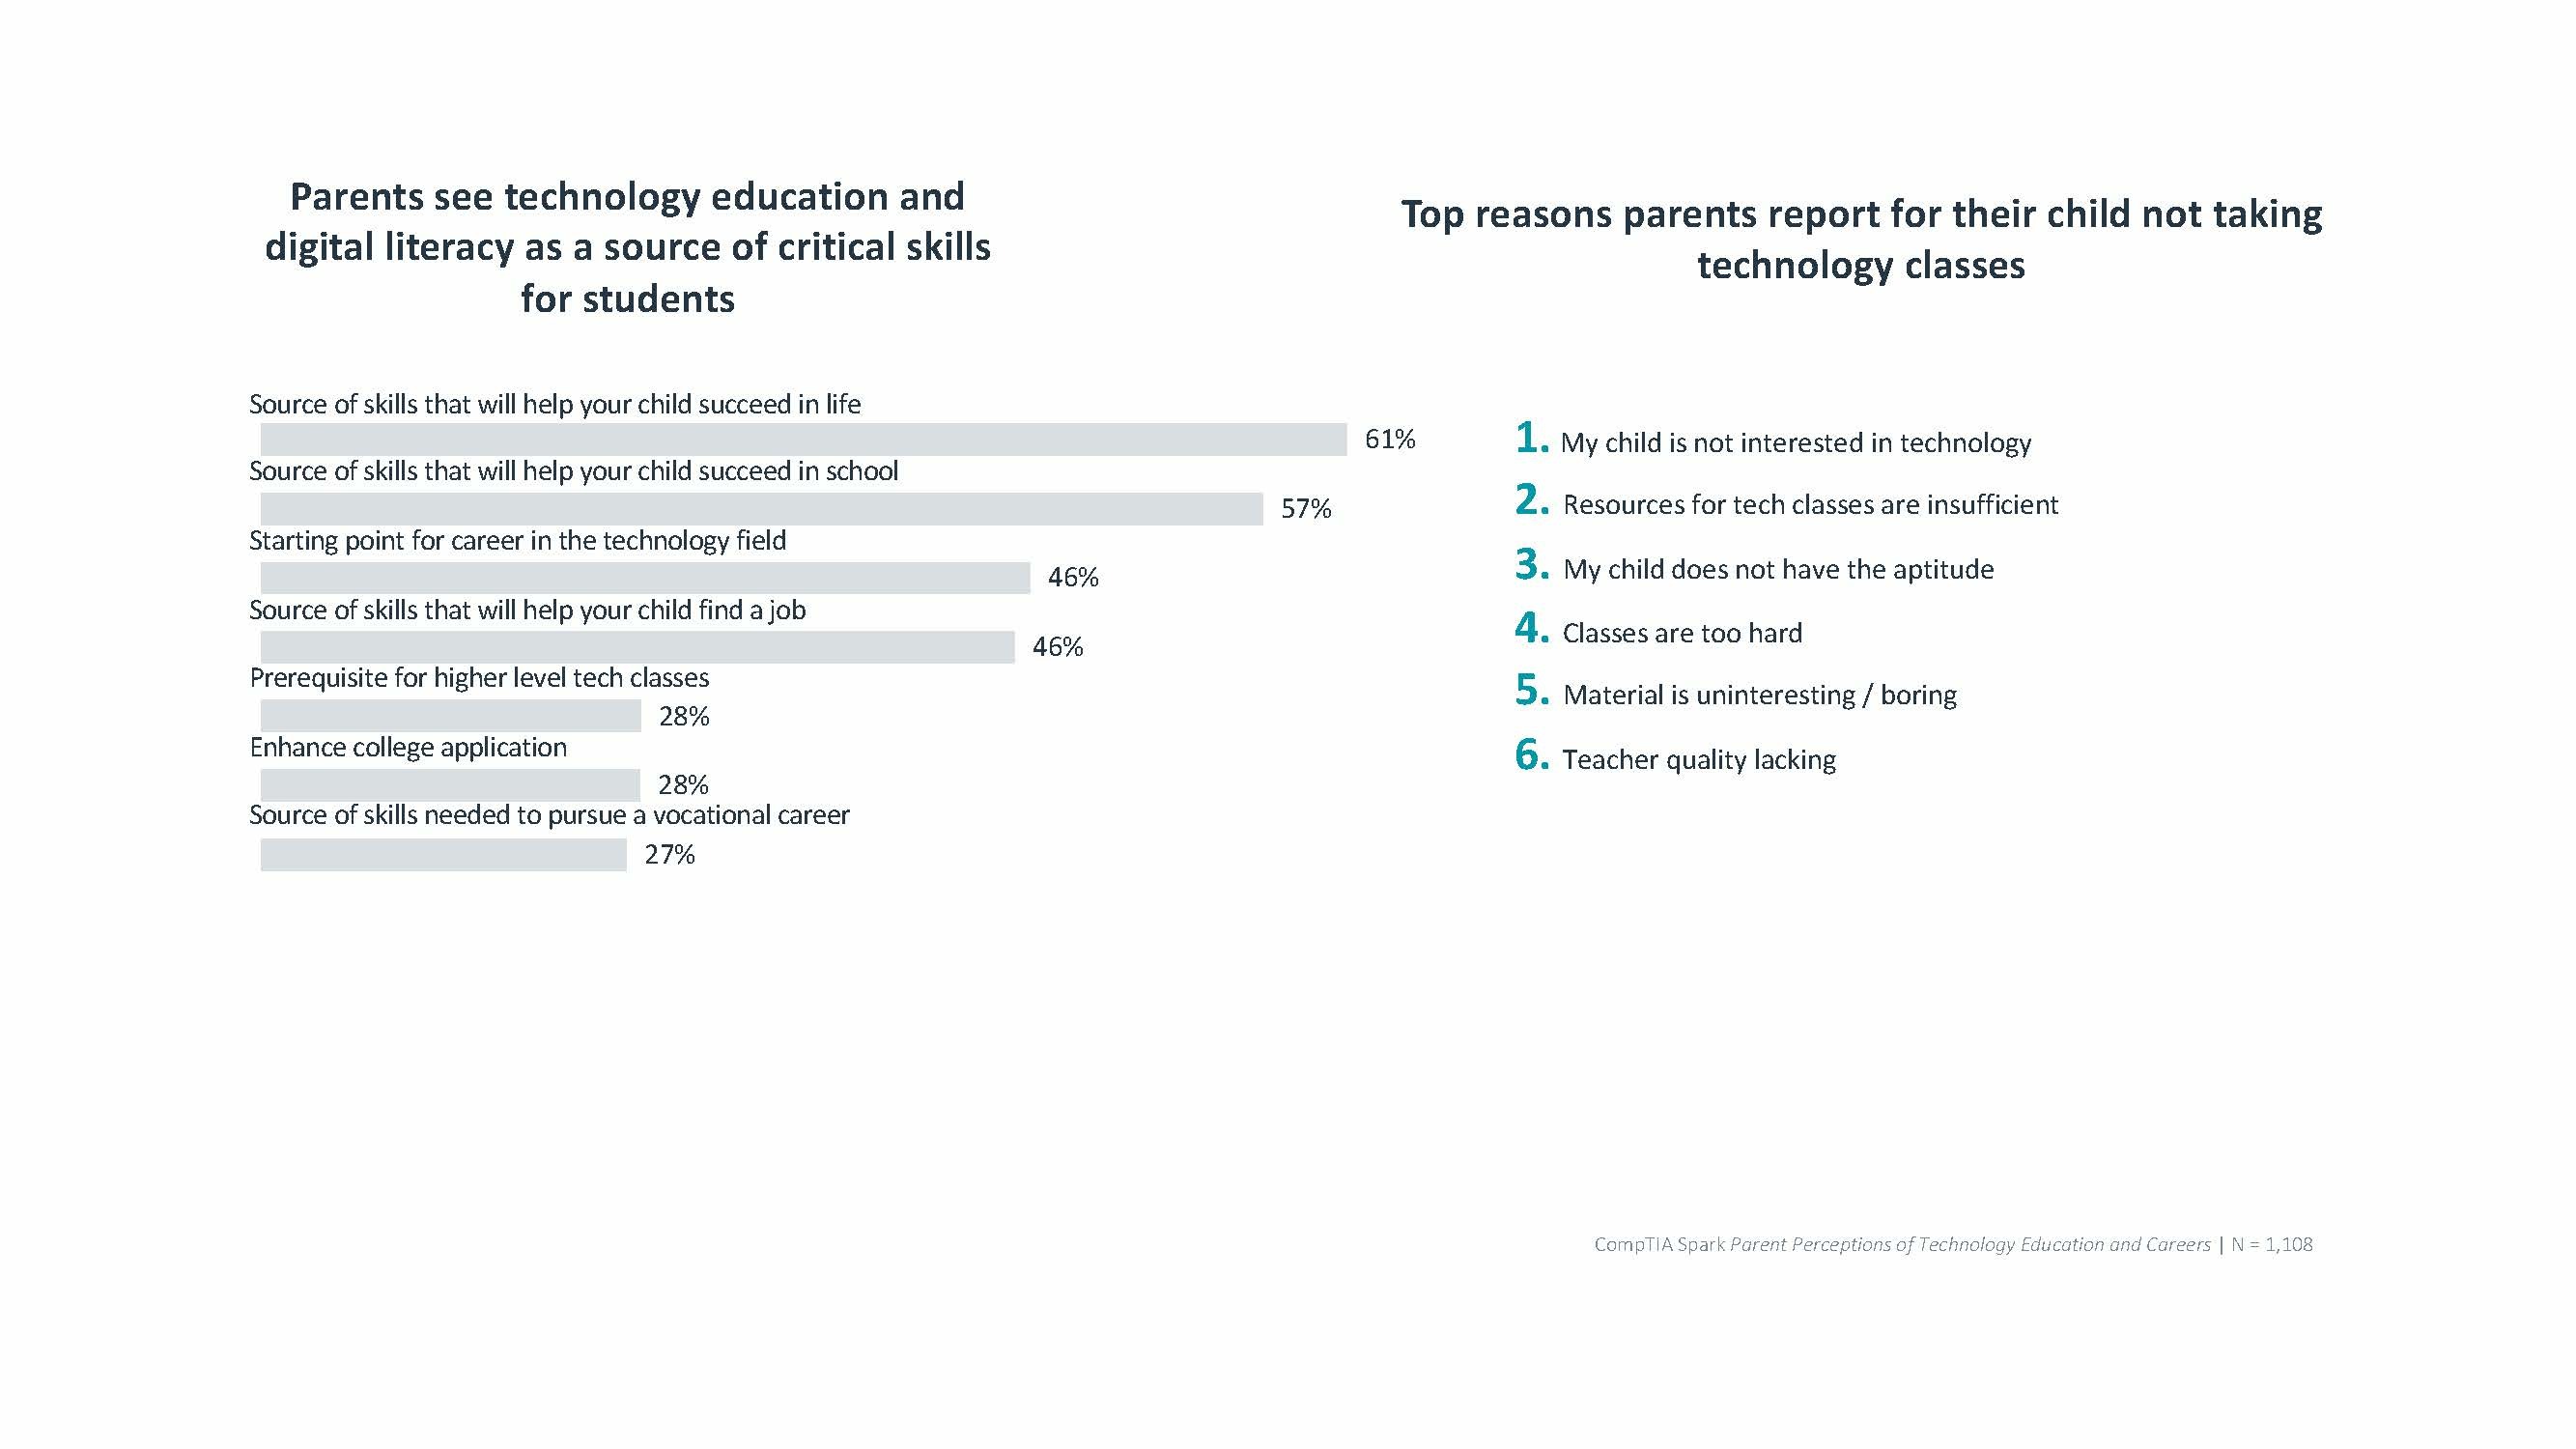 Parents see technology education and digital literacy as a source of critical skills for students. The top reason that parents report their child not taking technology courses is lack of interest